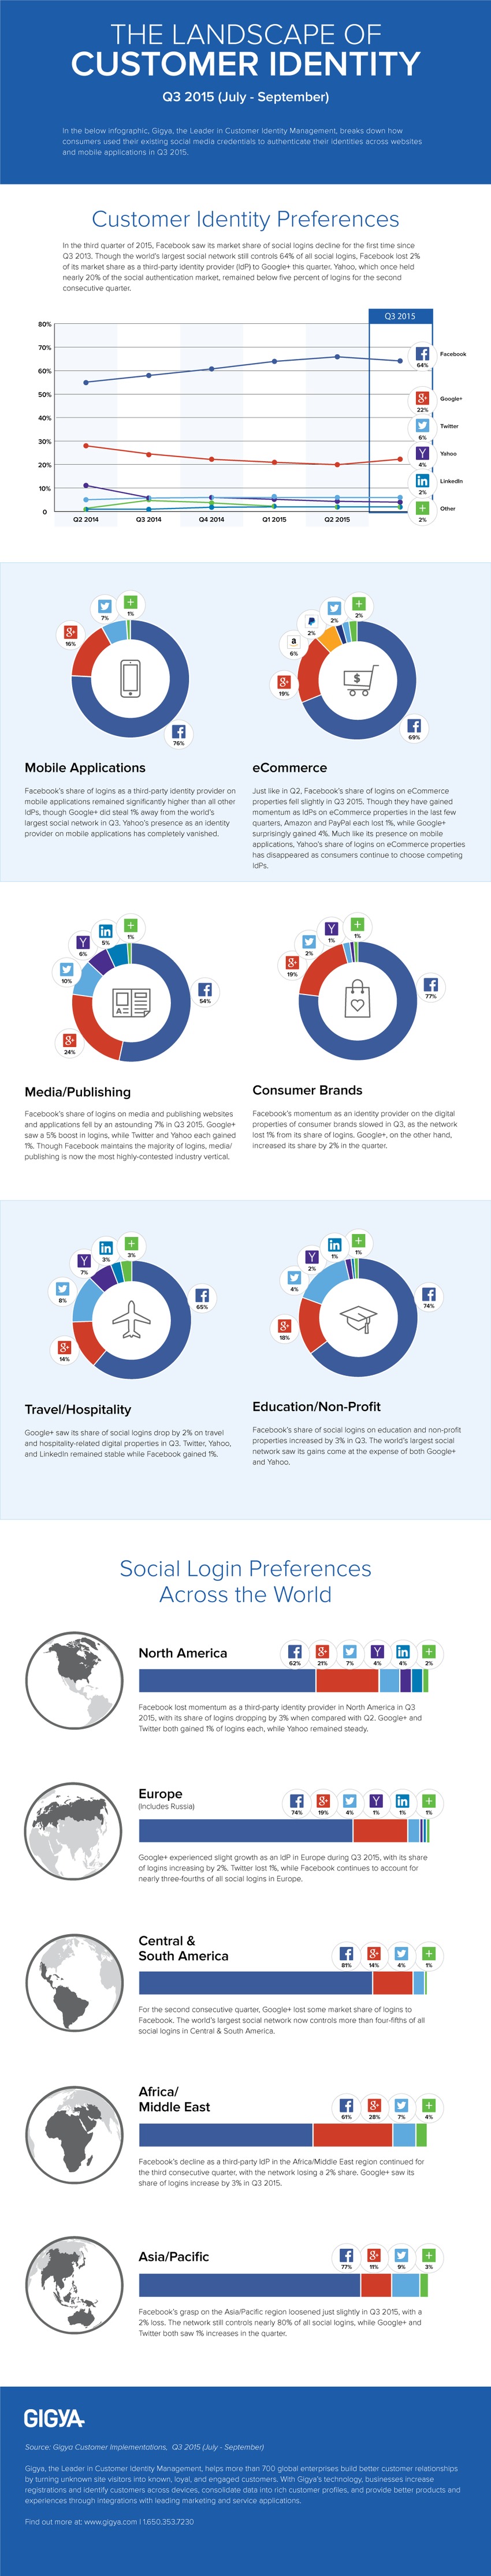 Infographic: the customer identity landscape, Q3 2015 - The Hub | The MarTech Digest | Scoop.it